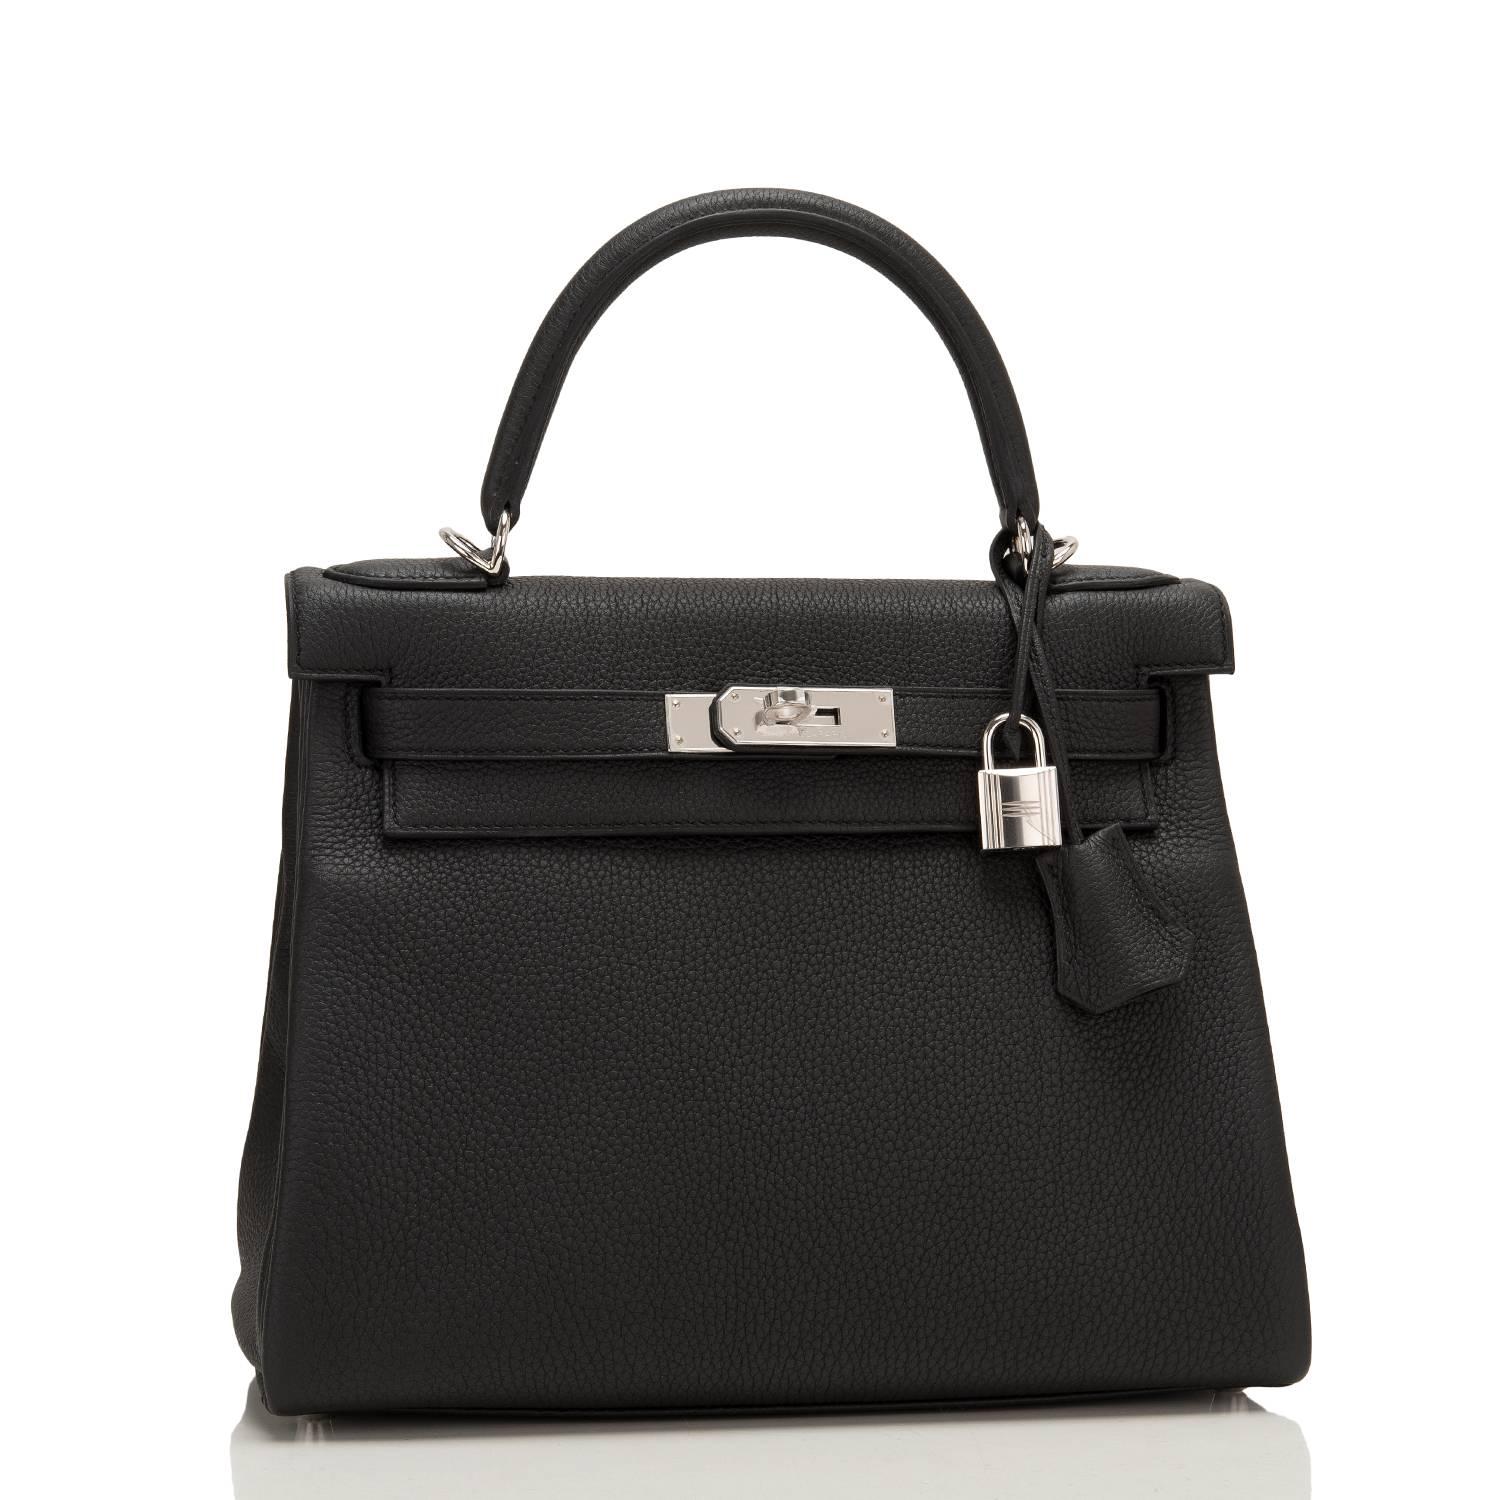 Hermes Black Kelly 28cm of togo leather with palladium hardware.

This Kelly, in the Retourne style, has tonal stitching, a front toggle closure, a clochette with lock and two keys, a single rolled handle, and a removable shoulder strap.

The